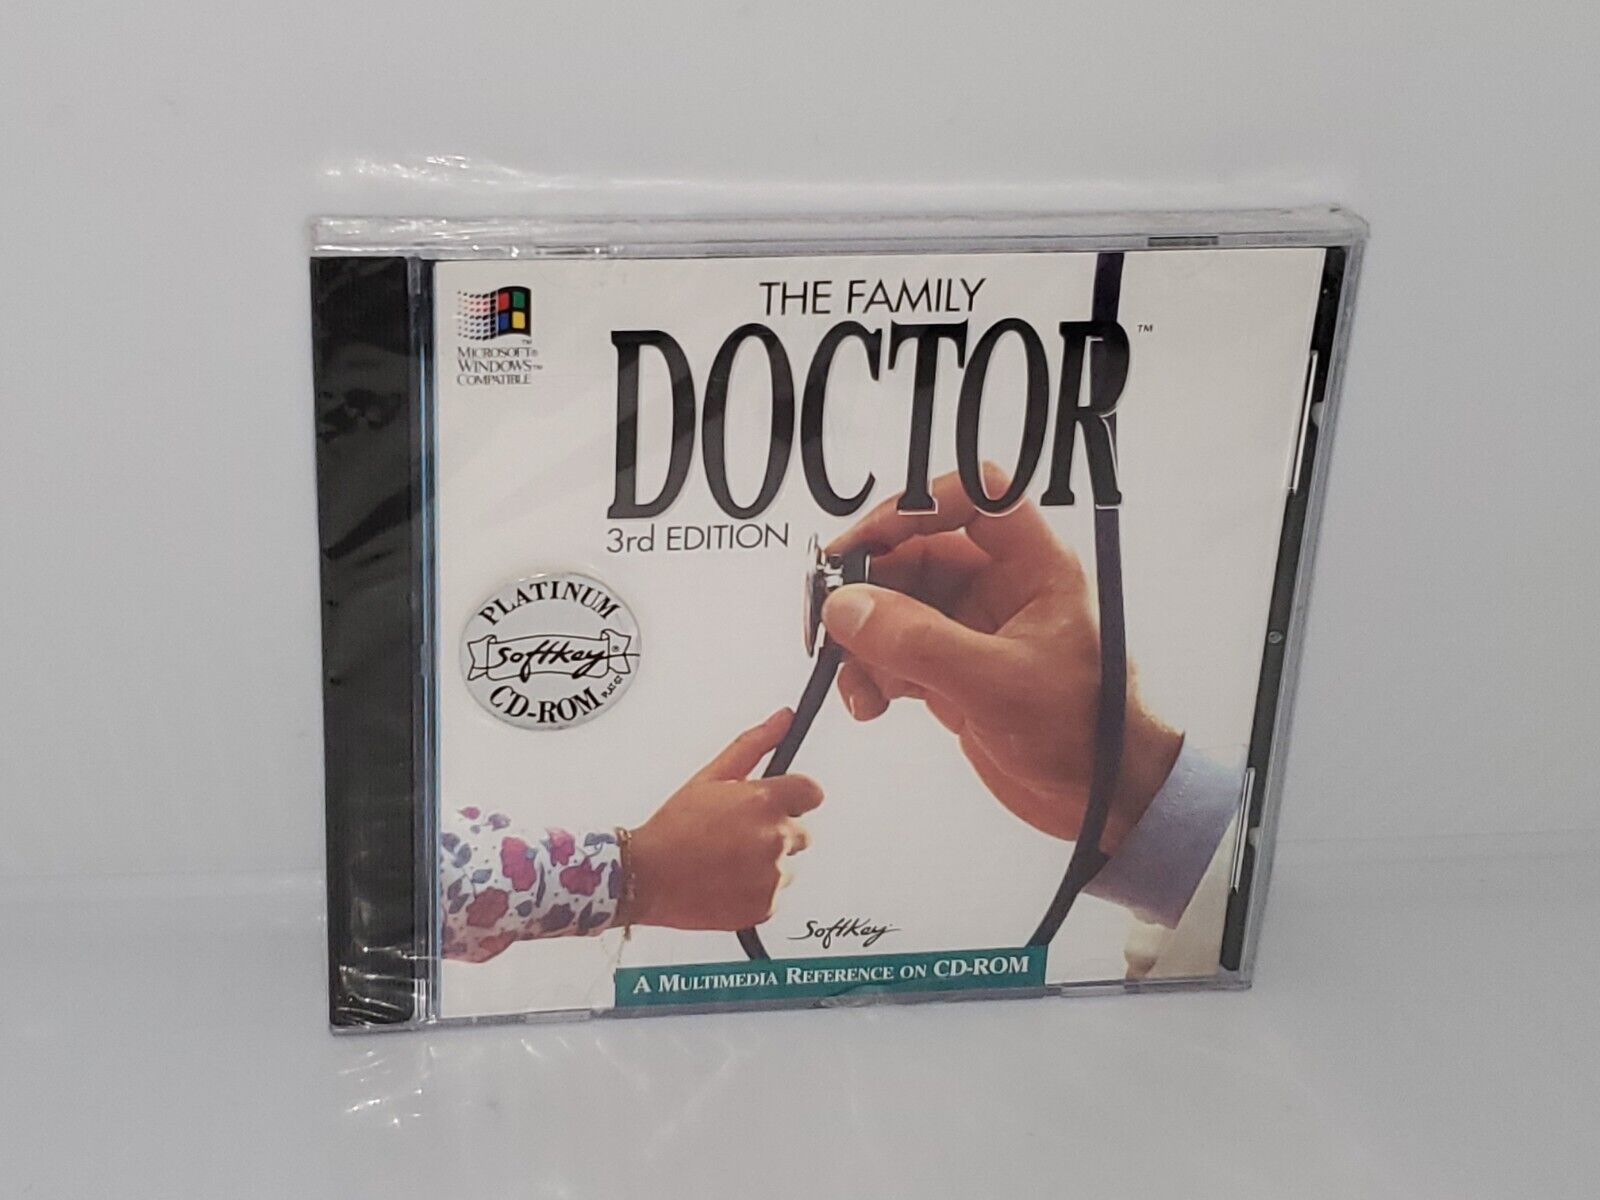 The Family Doctor 3rd Edition for Windows 3.1 and 95 (PC 1996)medical.NEW READ D